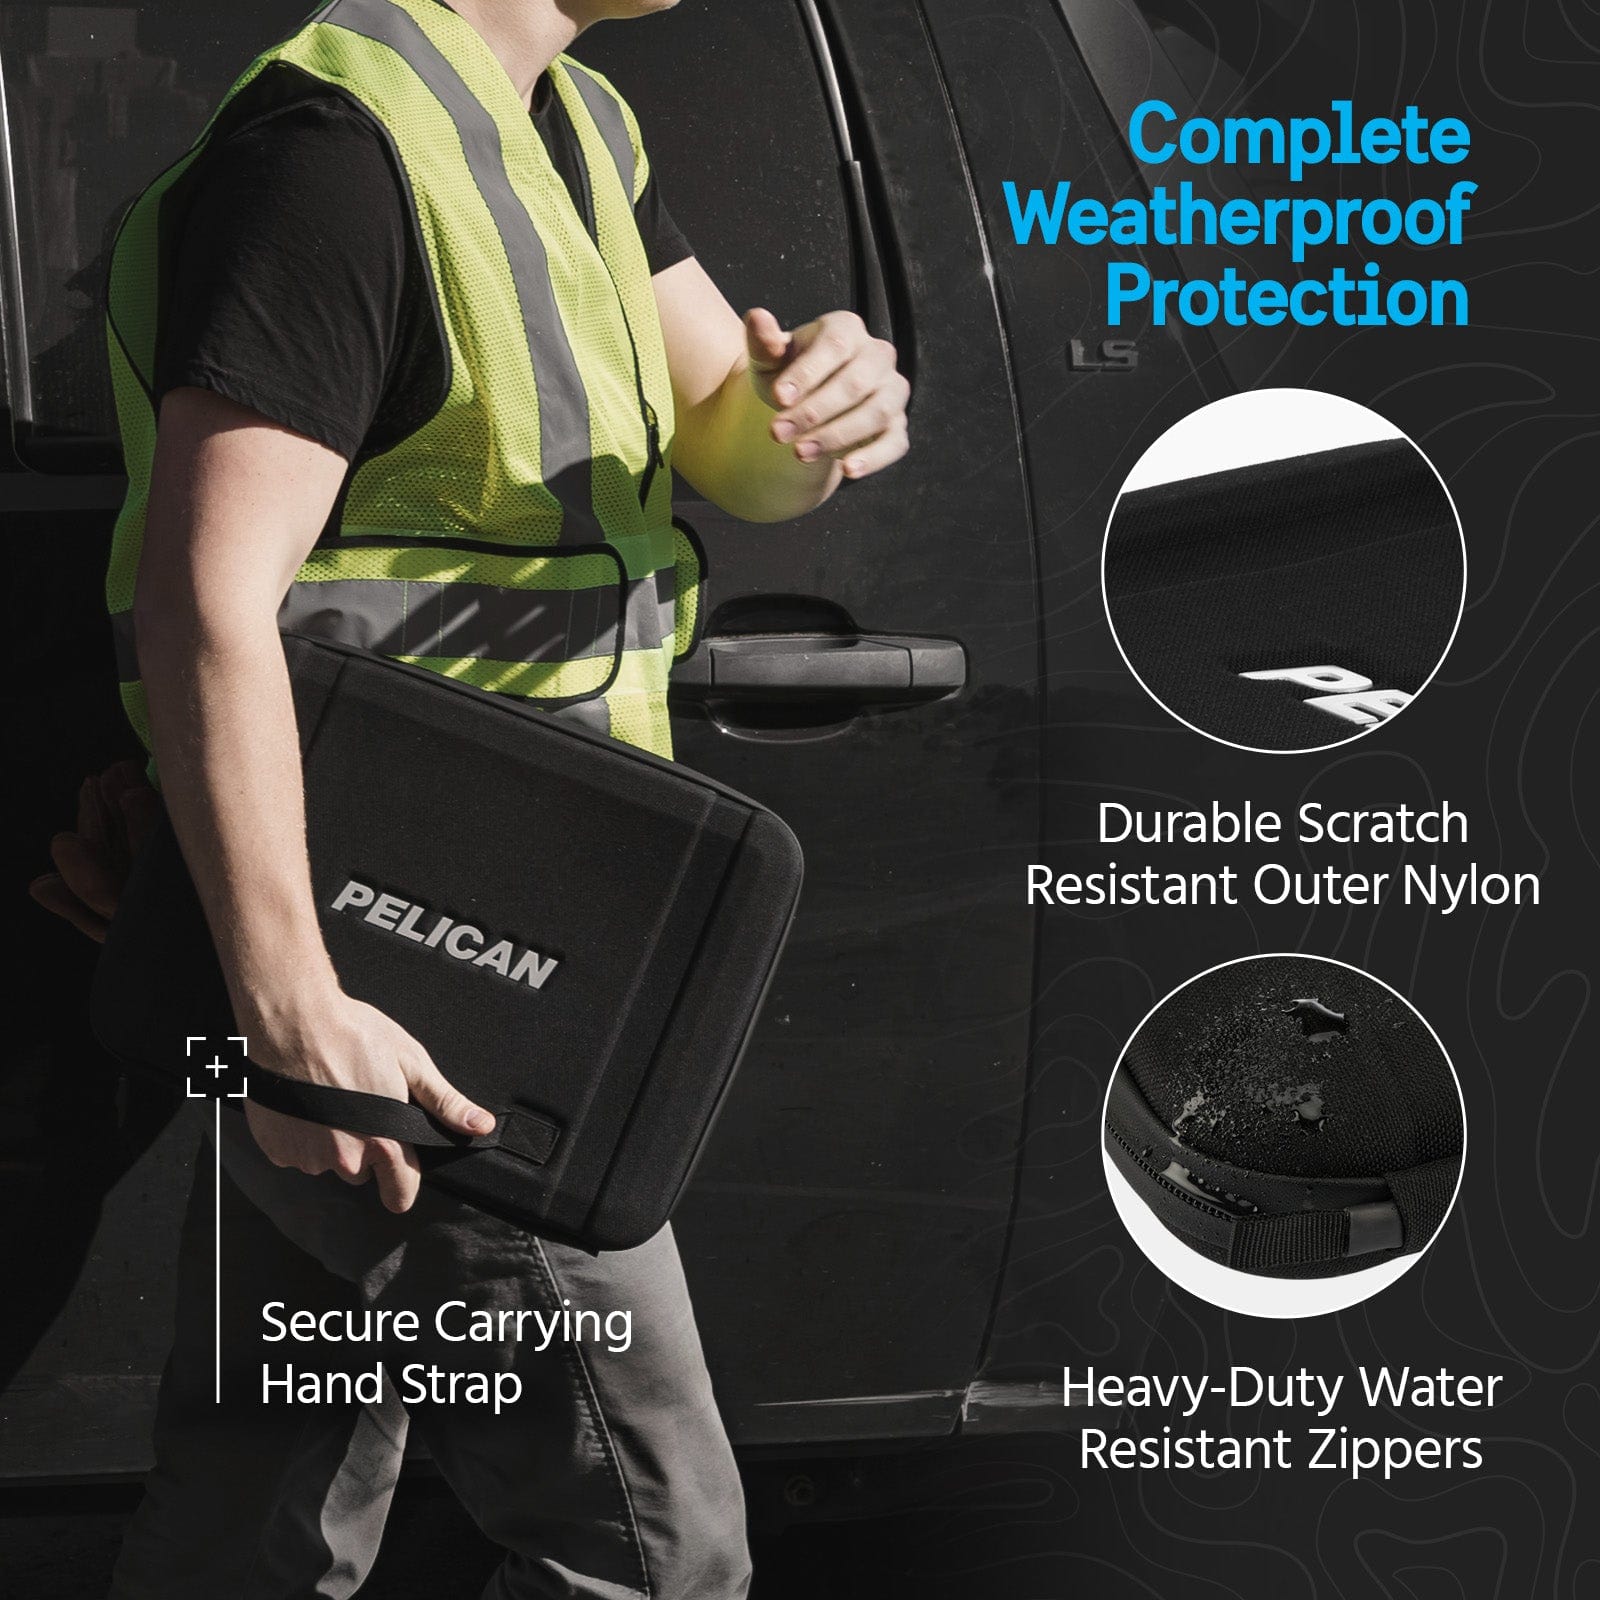 COMPLETE WEATHERPROOF PROTECTION. DURABLE SCRATCH RESISTANT OUTER NYLON, HEAVY-DUTY RESISTANT ZIPPERS. SECURE CARRYING HAND STRAP